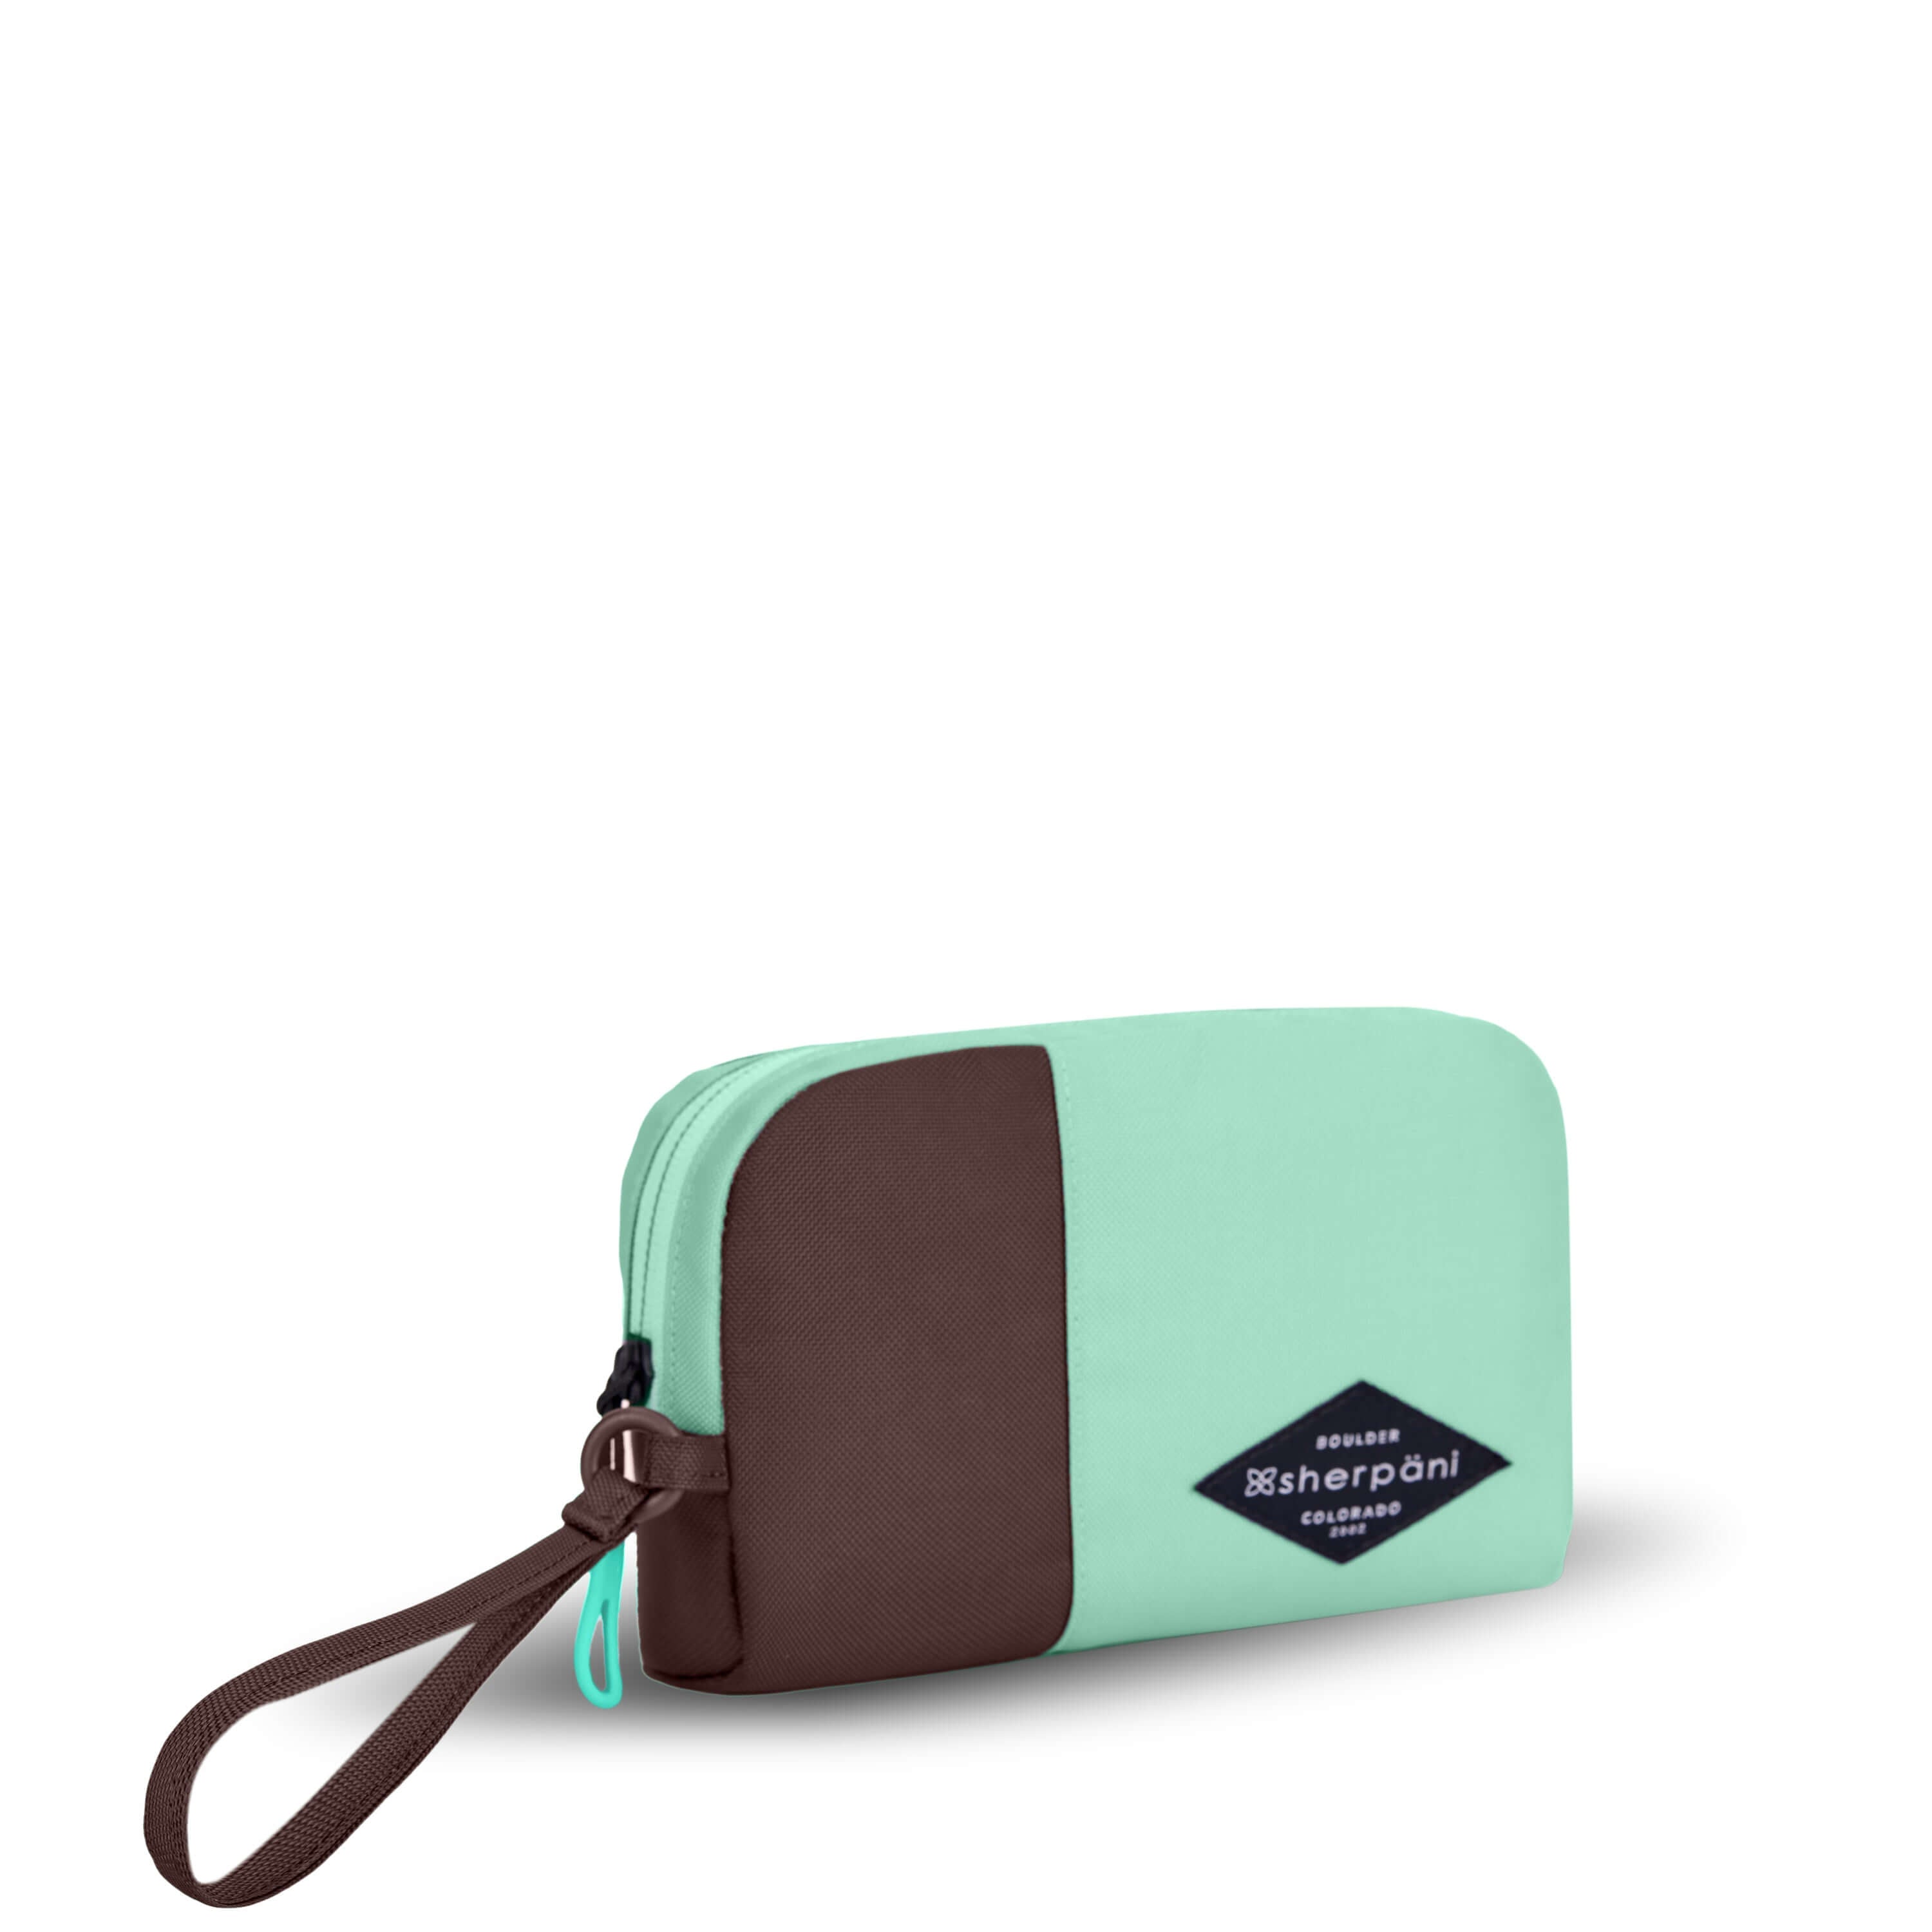 Angled front view of Sherpani travel accessory, the Jolie in Seagreen, in small size. The pouch is two-toned in light green and brown. It features a brown wristlet strap and an easy-pull zipper accented in light green. #color_seagreen